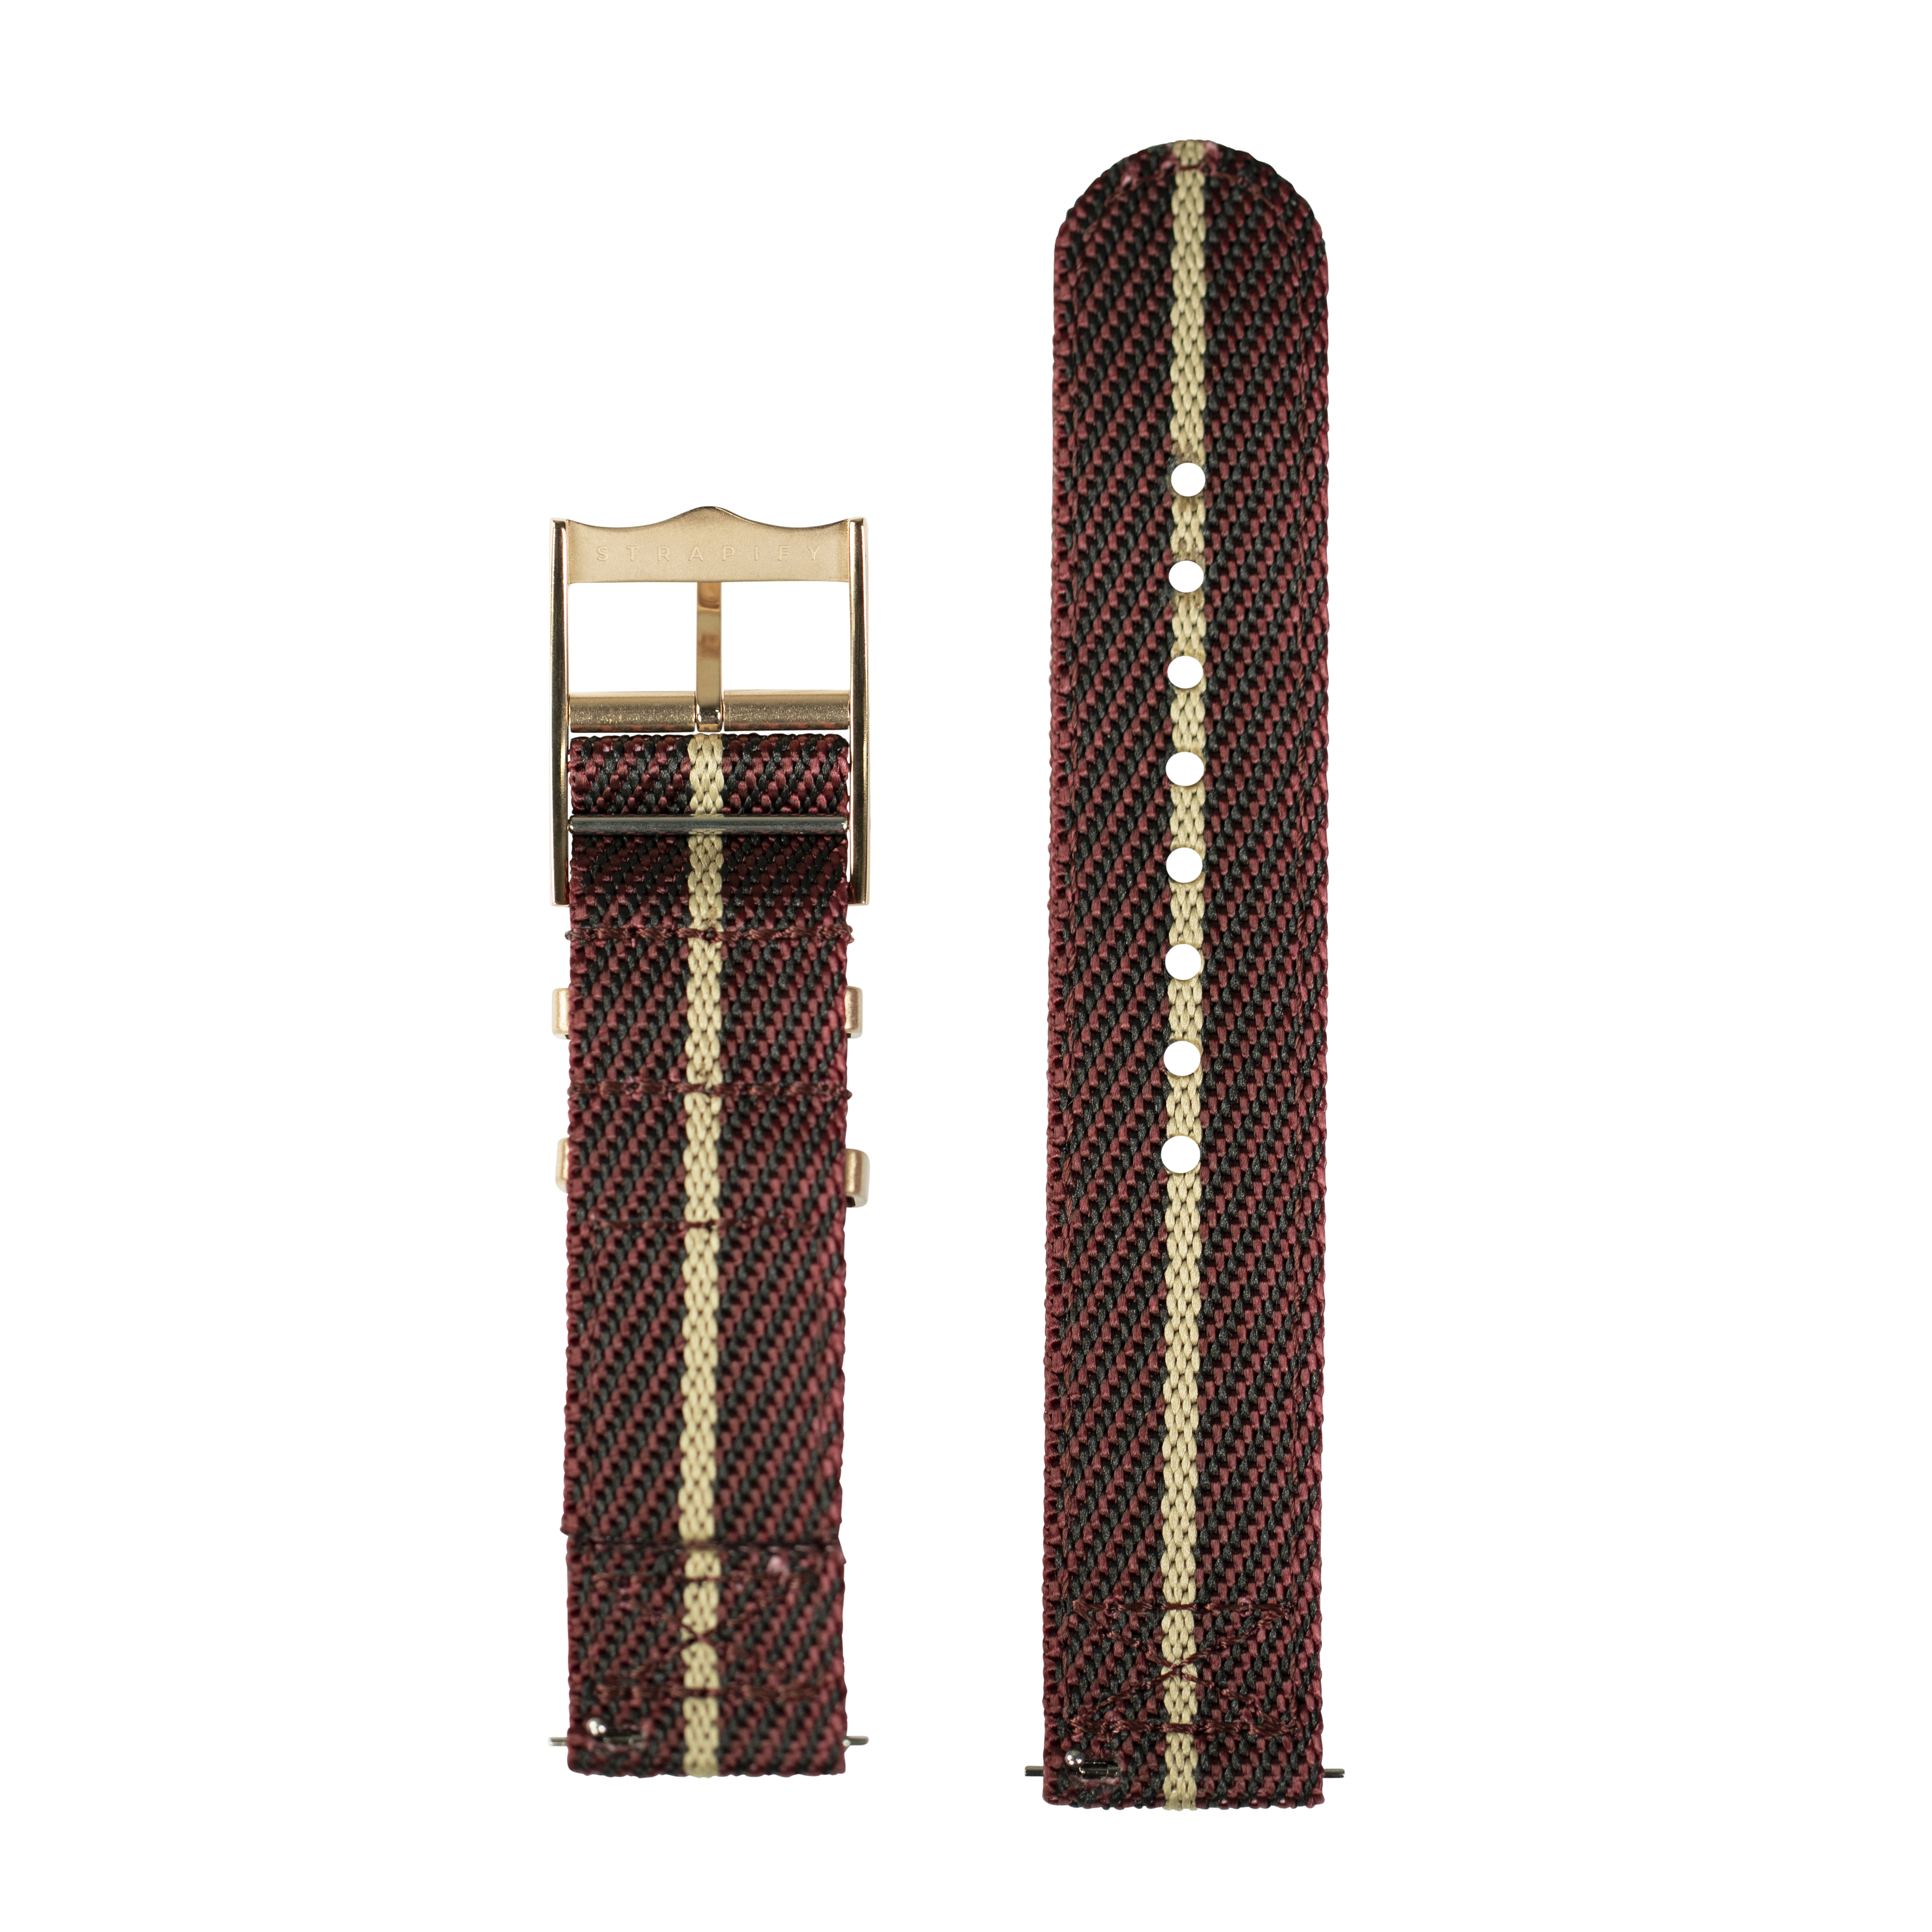 [Quick Release] Cross Militex - Wine Red / Wheat [Rose Gold Hardware]